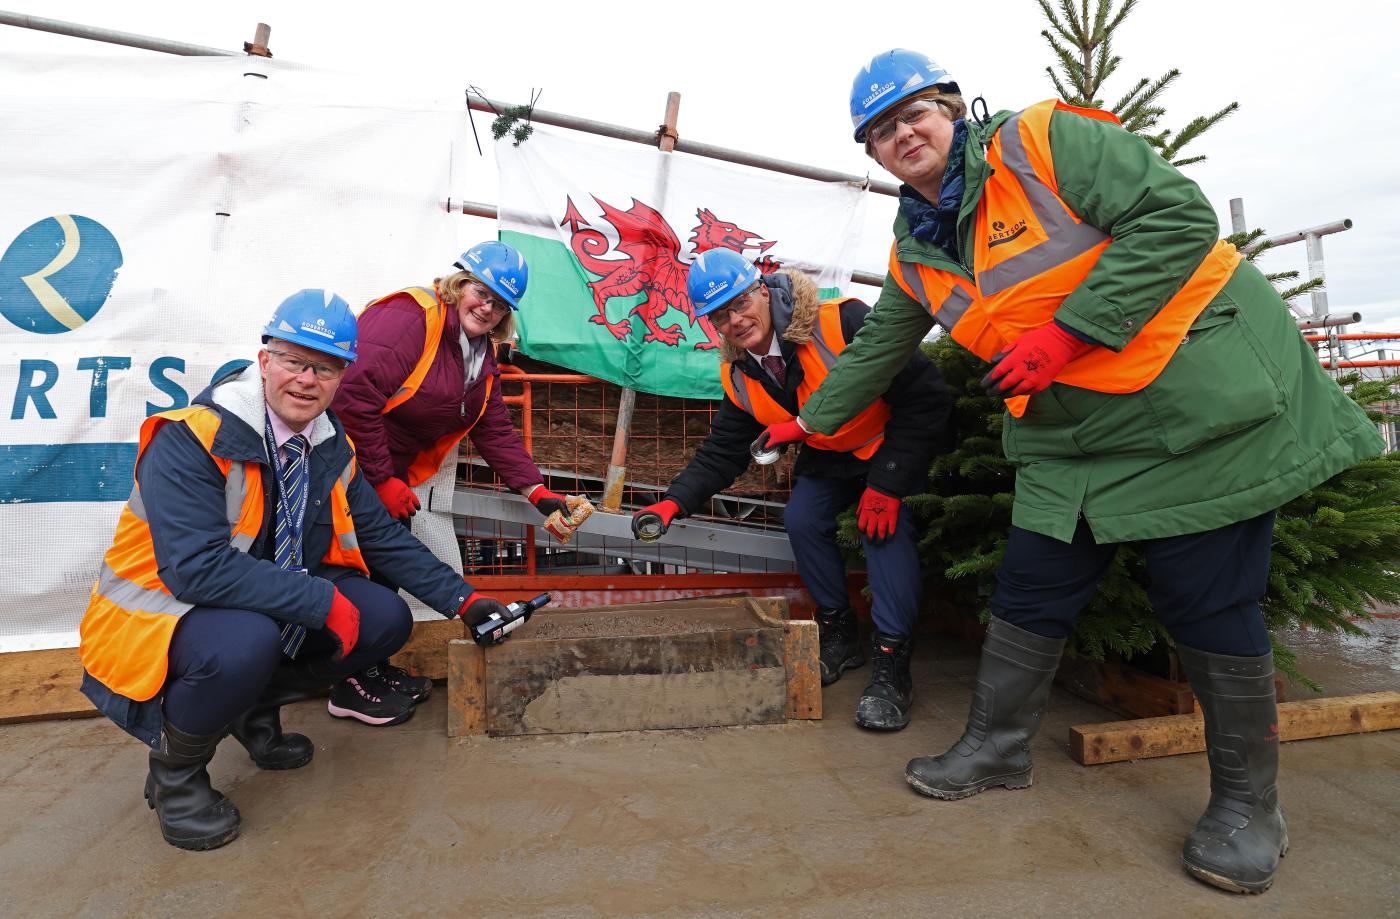 Representatives from local schools and Flintshire County Council putting items into a ceremonial brick as part of Mynydd Isa Campus' topping out